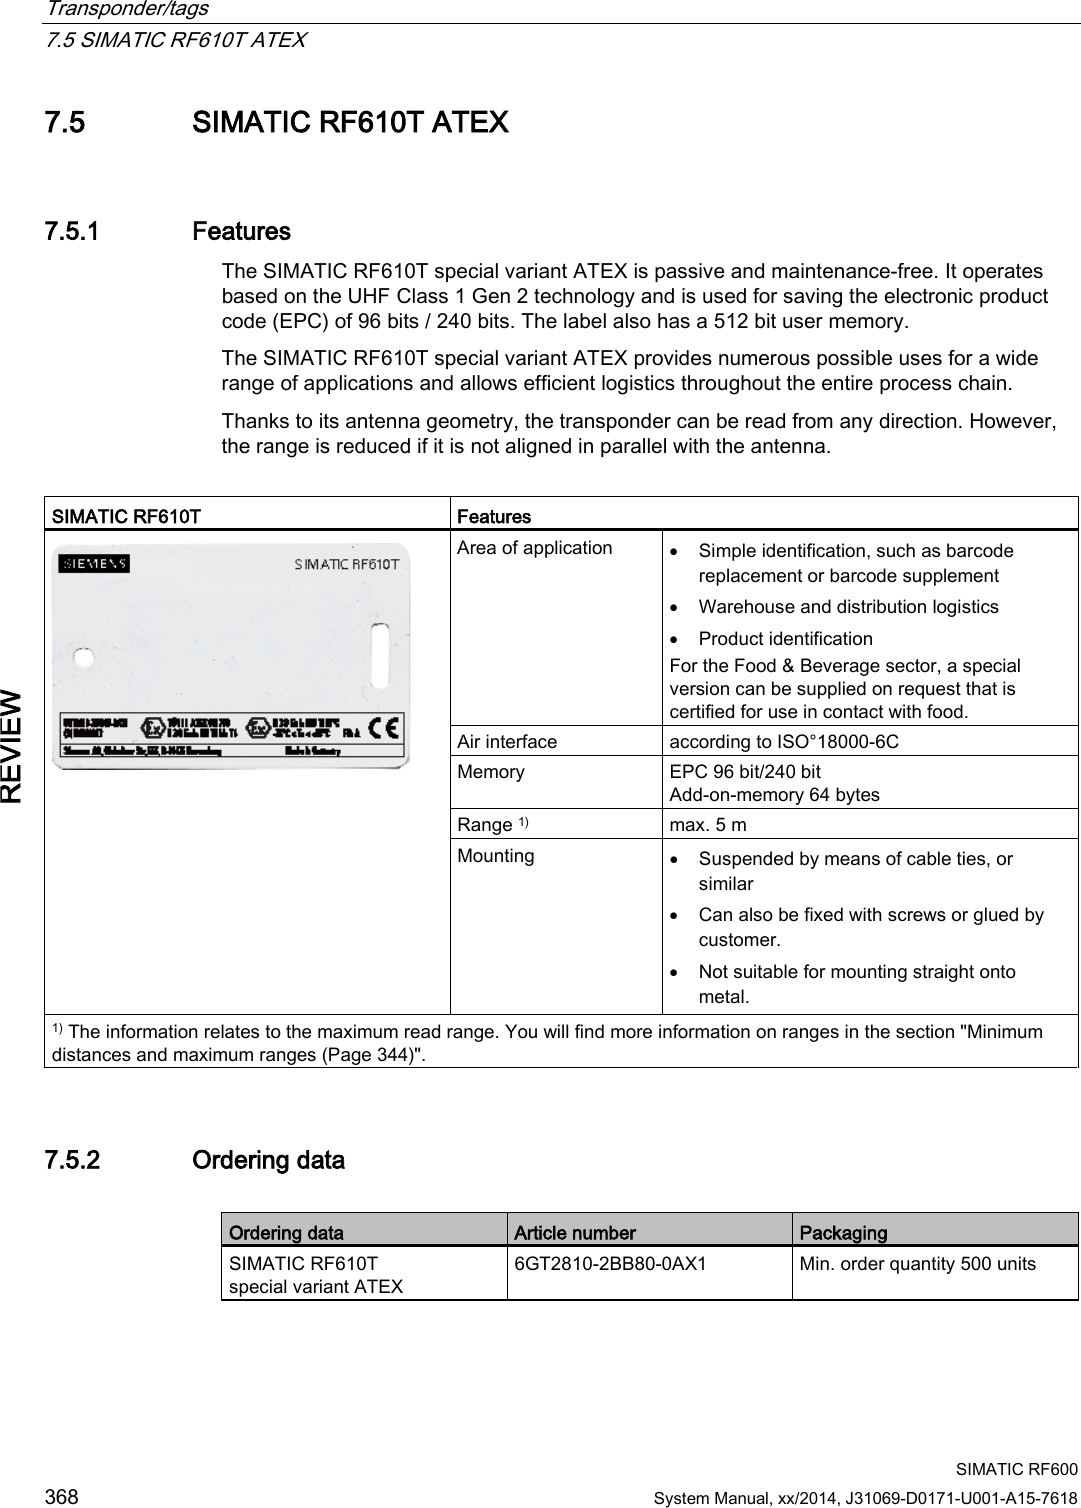 Transponder/tags   7.5 SIMATIC RF610T ATEX  SIMATIC RF600 368 System Manual, xx/2014, J31069-D0171-U001-A15-7618 REVIEW 7.5 SIMATIC RF610T ATEX 7.5.1 Features The SIMATIC RF610T special variant ATEX is passive and maintenance-free. It operates based on the UHF Class 1 Gen 2 technology and is used for saving the electronic product code (EPC) of 96 bits / 240 bits. The label also has a 512 bit user memory. The SIMATIC RF610T special variant ATEX provides numerous possible uses for a wide range of applications and allows efficient logistics throughout the entire process chain. Thanks to its antenna geometry, the transponder can be read from any direction. However, the range is reduced if it is not aligned in parallel with the antenna.  SIMATIC RF610T Features  Area of application • Simple identification, such as barcode replacement or barcode supplement • Warehouse and distribution logistics • Product identification For the Food &amp; Beverage sector, a special version can be supplied on request that is certified for use in contact with food. Air interface according to ISO°18000-6C Memory EPC 96 bit/240 bit Add-on-memory 64 bytes Range 1) max. 5 m Mounting • Suspended by means of cable ties, or similar • Can also be fixed with screws or glued by customer. • Not suitable for mounting straight onto metal. 1) The information relates to the maximum read range. You will find more information on ranges in the section &quot;Minimum distances and maximum ranges (Page 344)&quot;. 7.5.2 Ordering data  Ordering data Article number Packaging SIMATIC RF610T special variant ATEX 6GT2810-2BB80-0AX1 Min. order quantity 500 units 